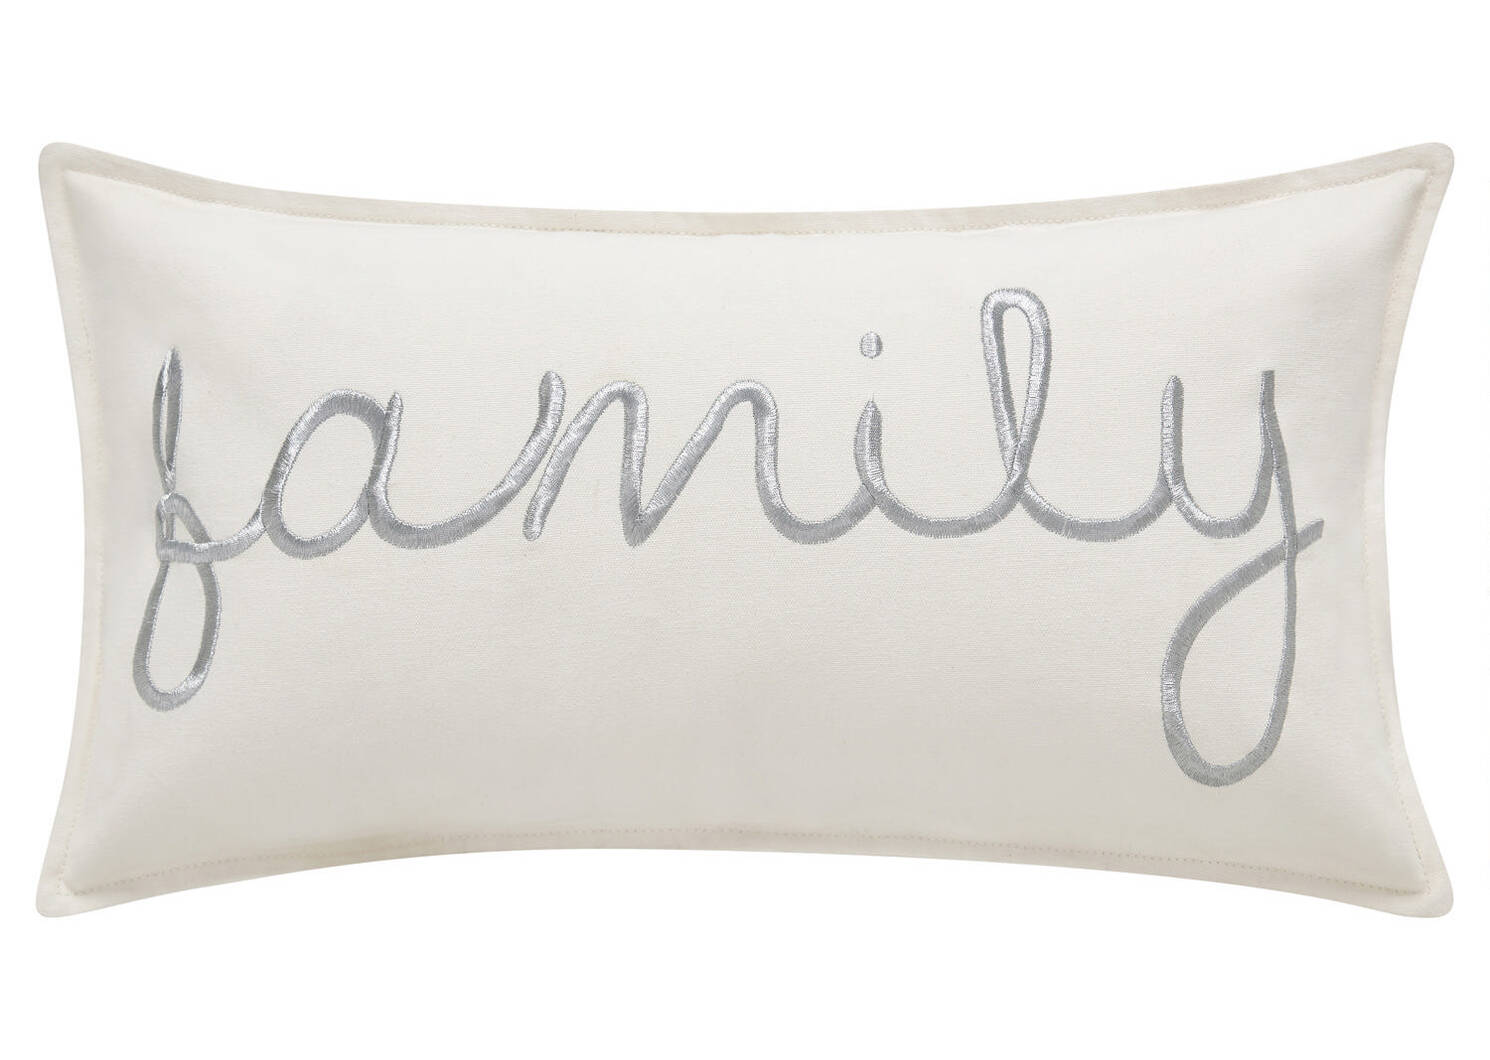 Coussin Family 12x22 blanc